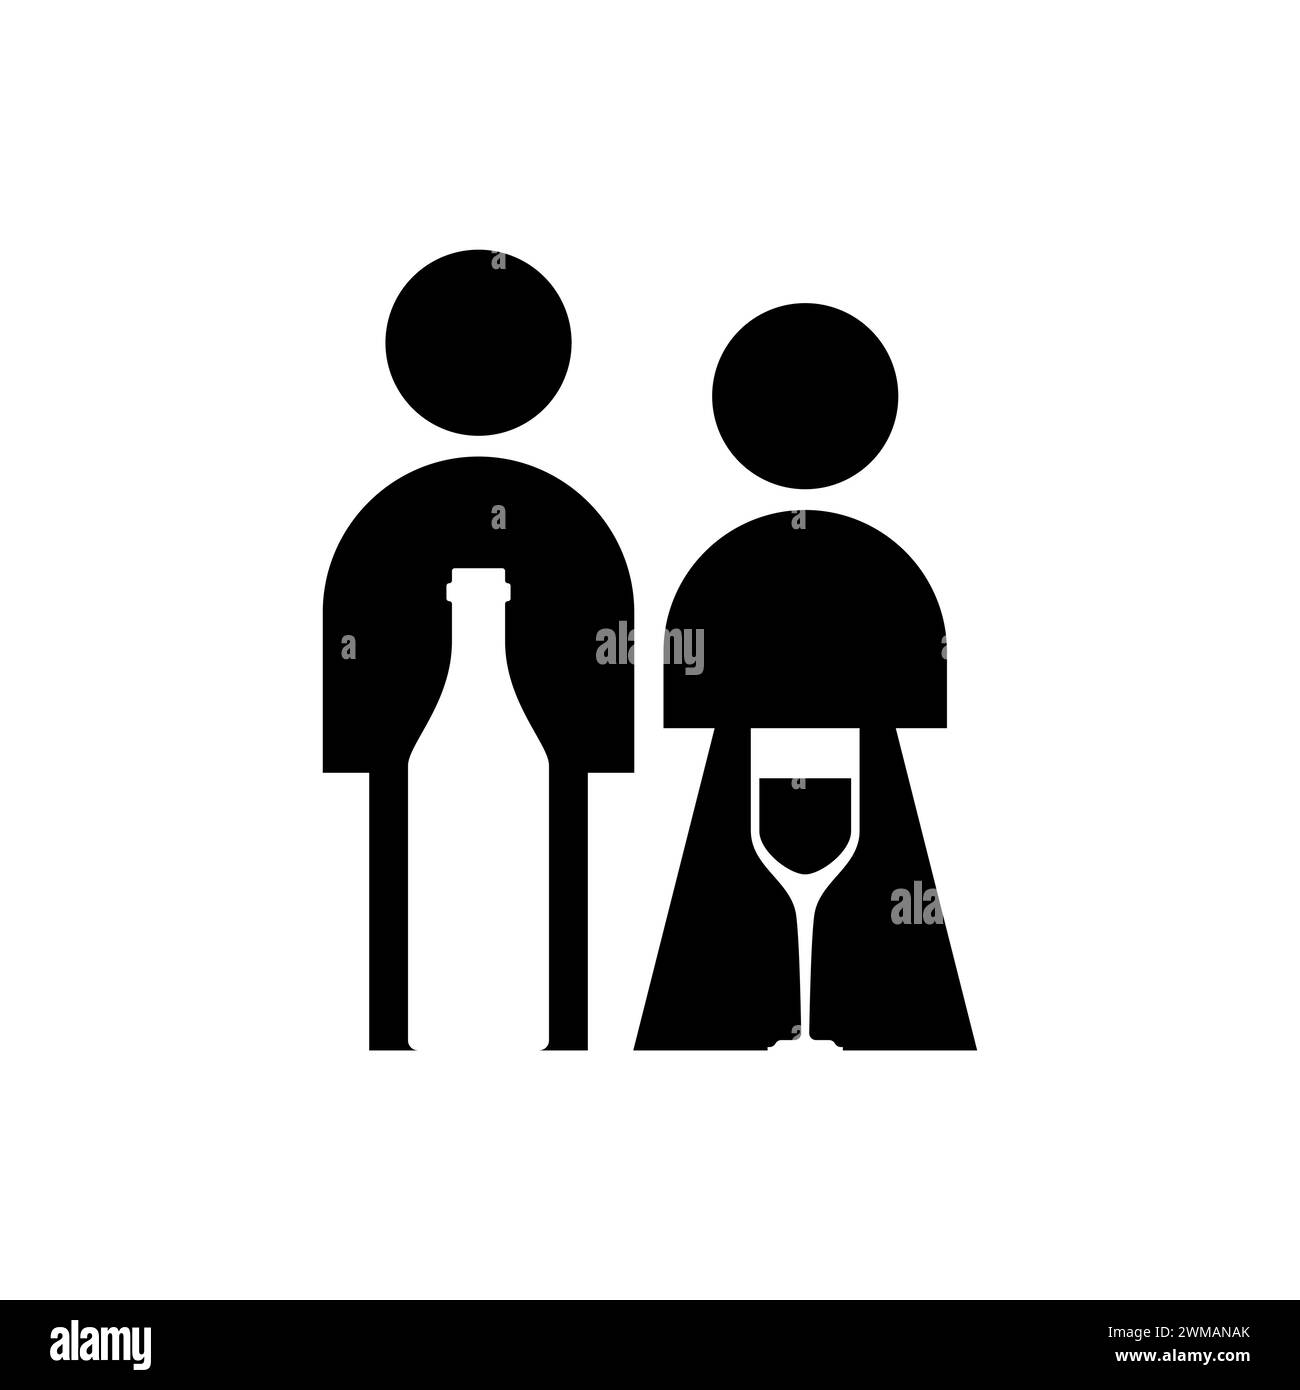 Family of alcoholics sign. Husband and wife drink alcohol. Social problem in society. Alcoholism disease Stock Vector